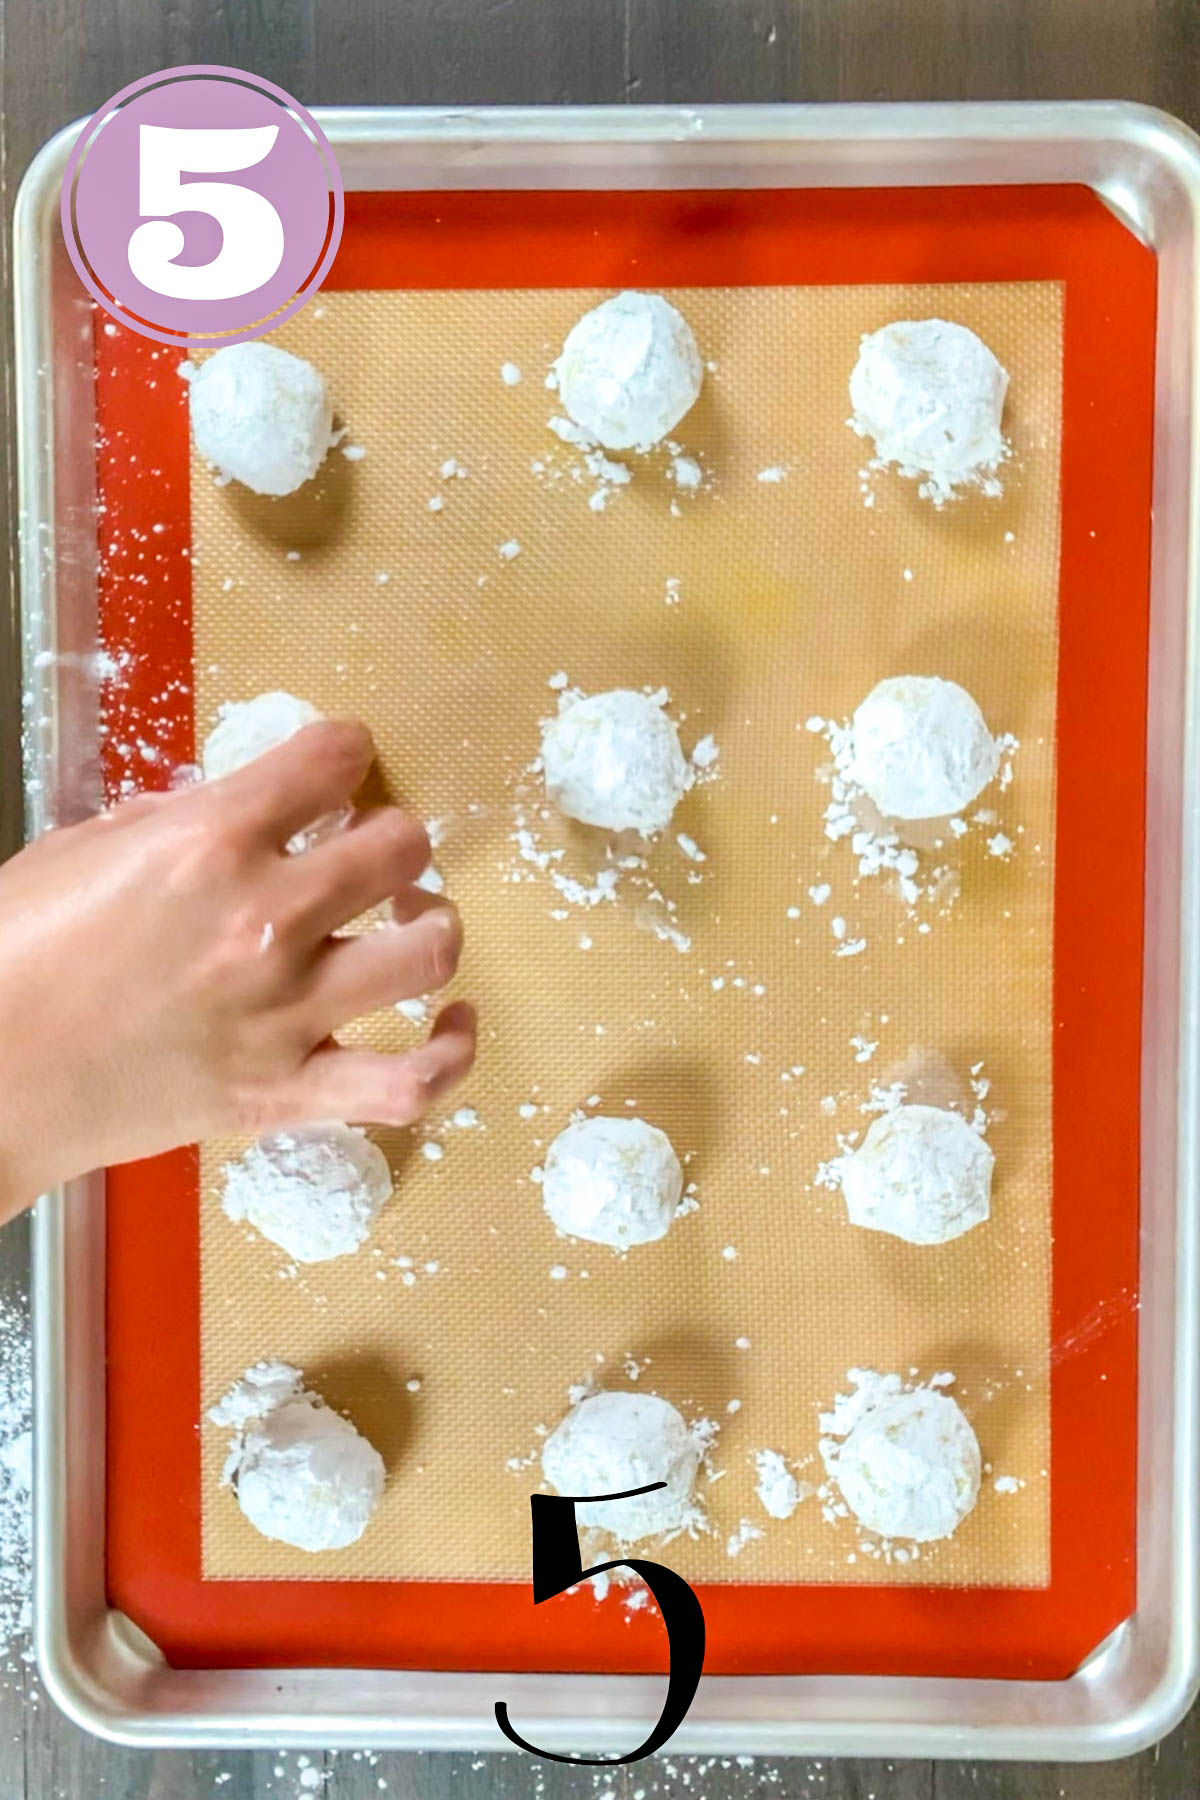 lemon crinkle cookies balls placed on a silicone mat ready to go to the oven.